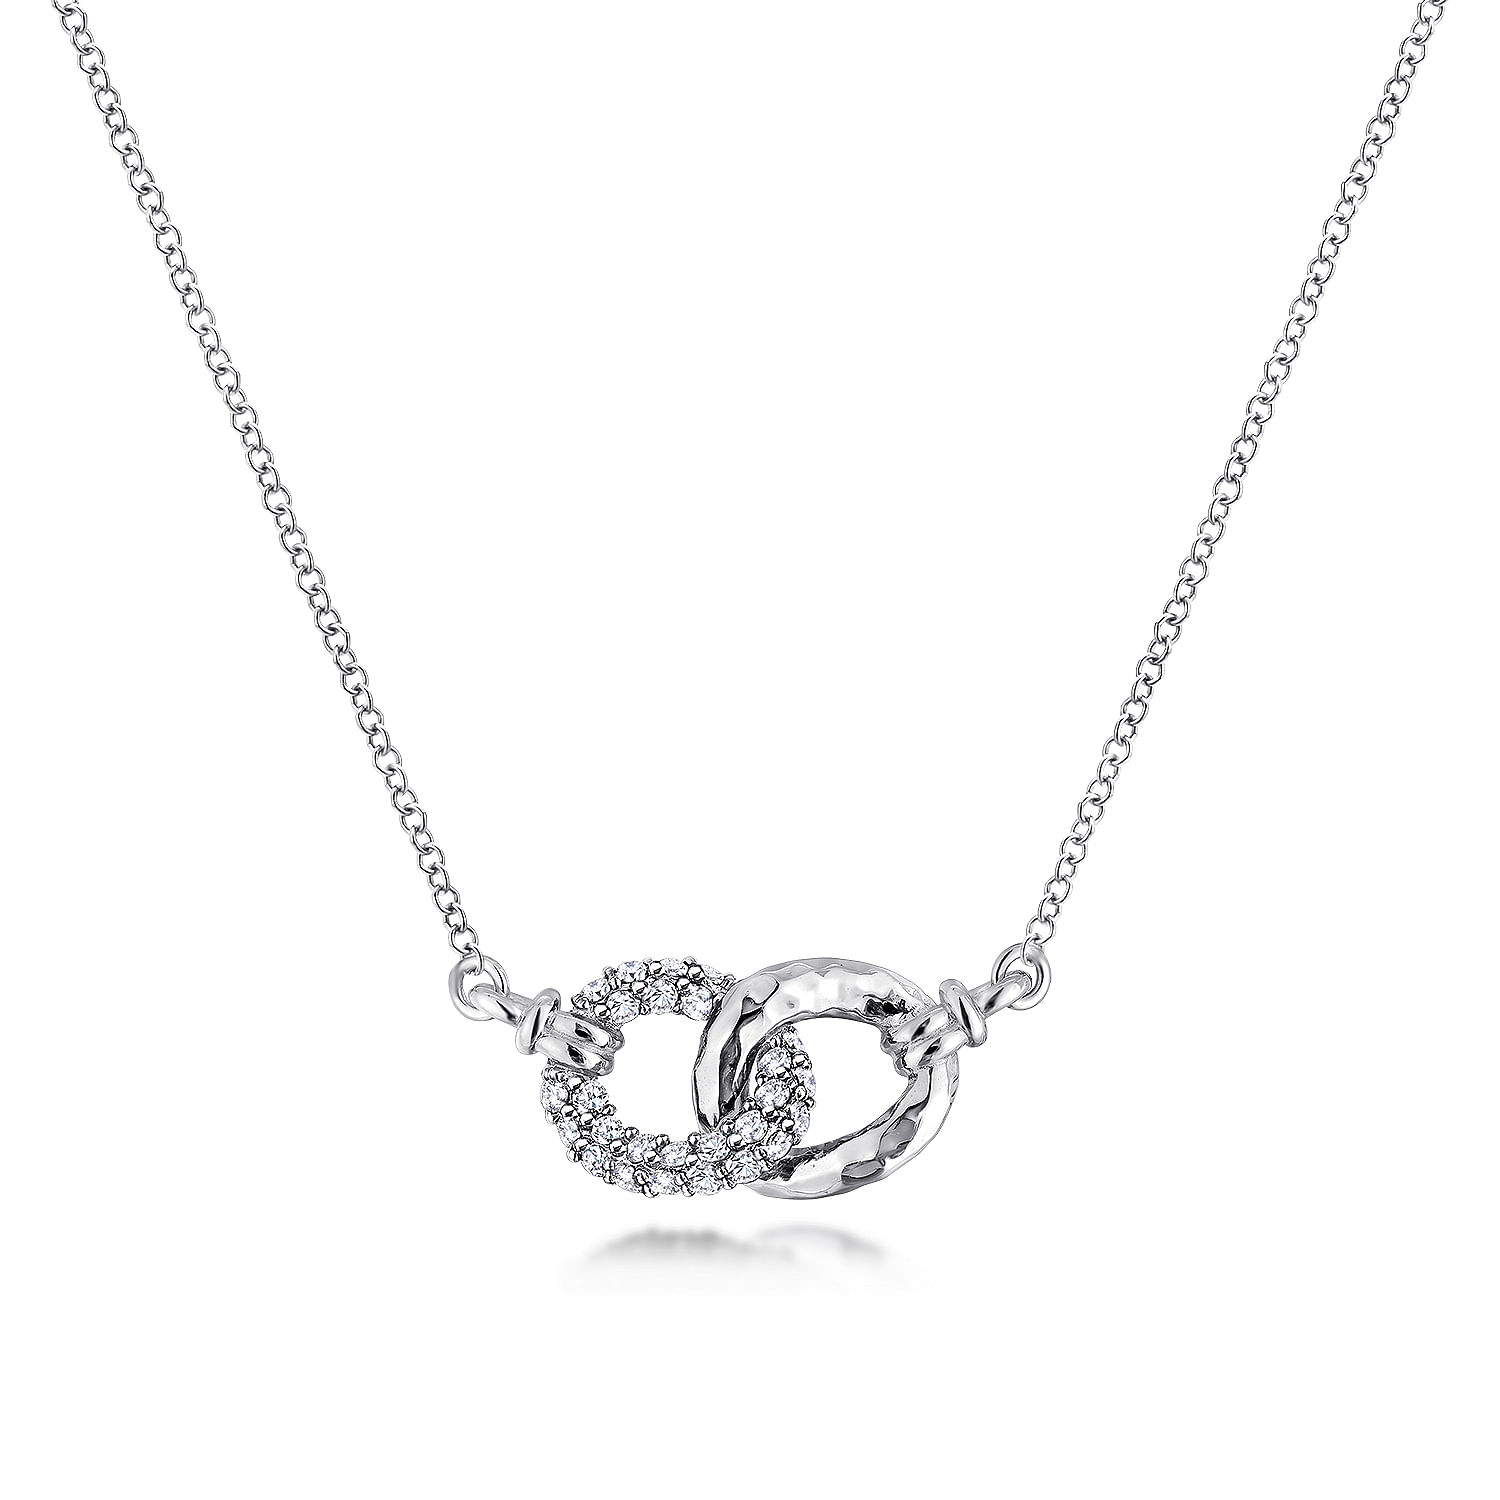 Sterling Silver and White Sapphire Interlocking Links Necklace